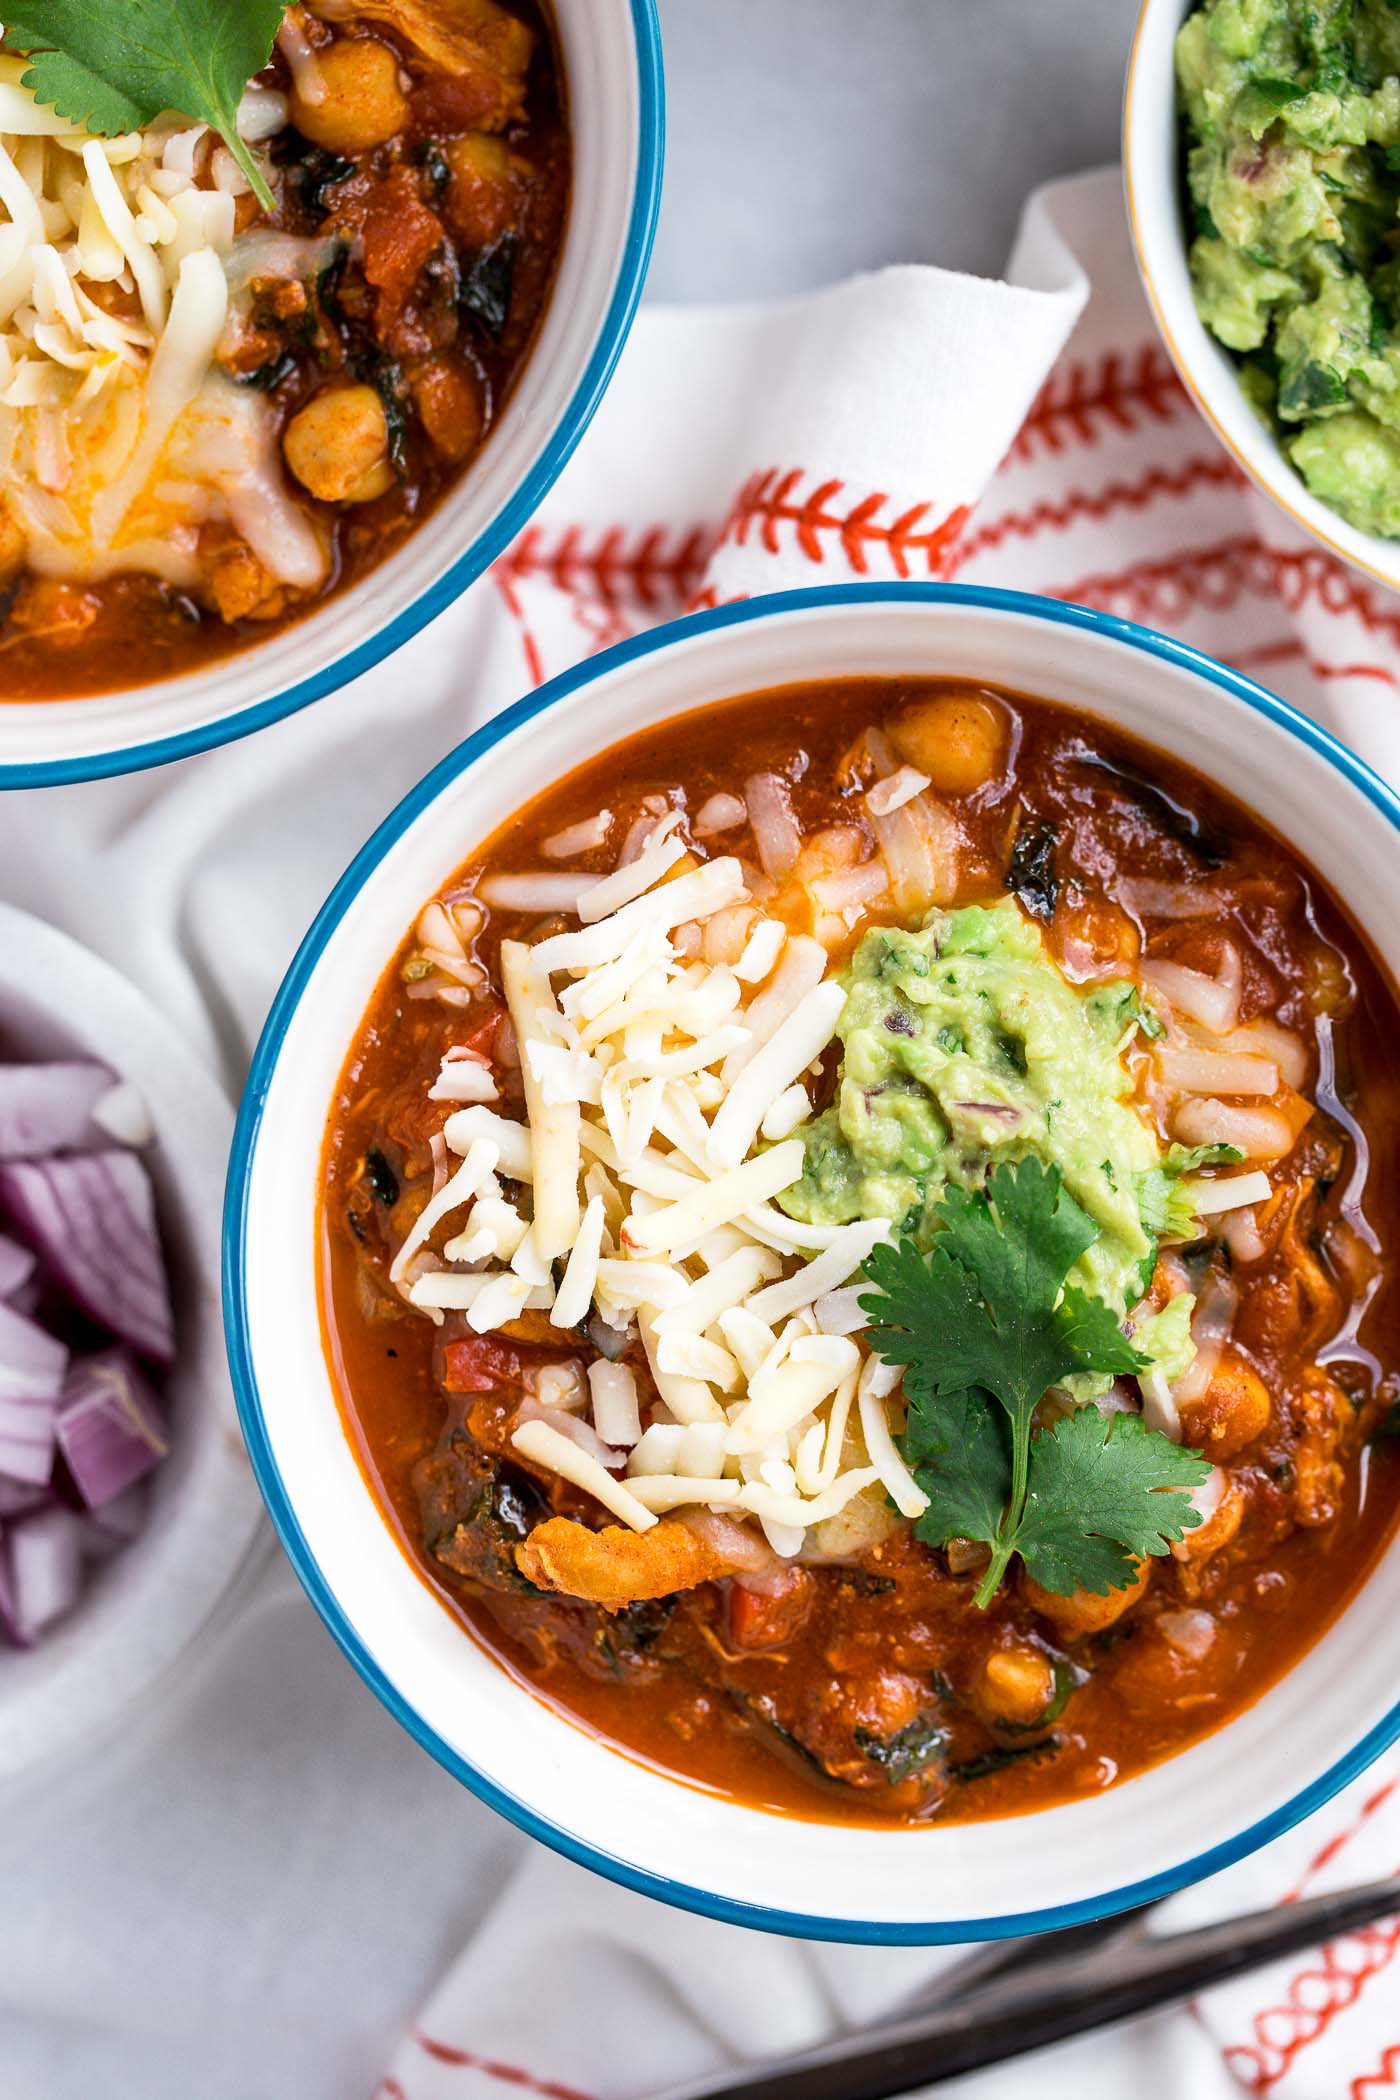 chipotle turkey chili is healthy, comforting, & full of modern flare - smoky heat of chipotle peppers, sweet bites of sweet potato, nutrient-dense kale, & a little touch of cinnamon for some warmth. the perfect cozy comfort food dinner to use up thanksgiving leftovers! #playswellwithbutter #chilirecipe #turkey #comfortfood #thanksgivingleftovers #leftoverturkey